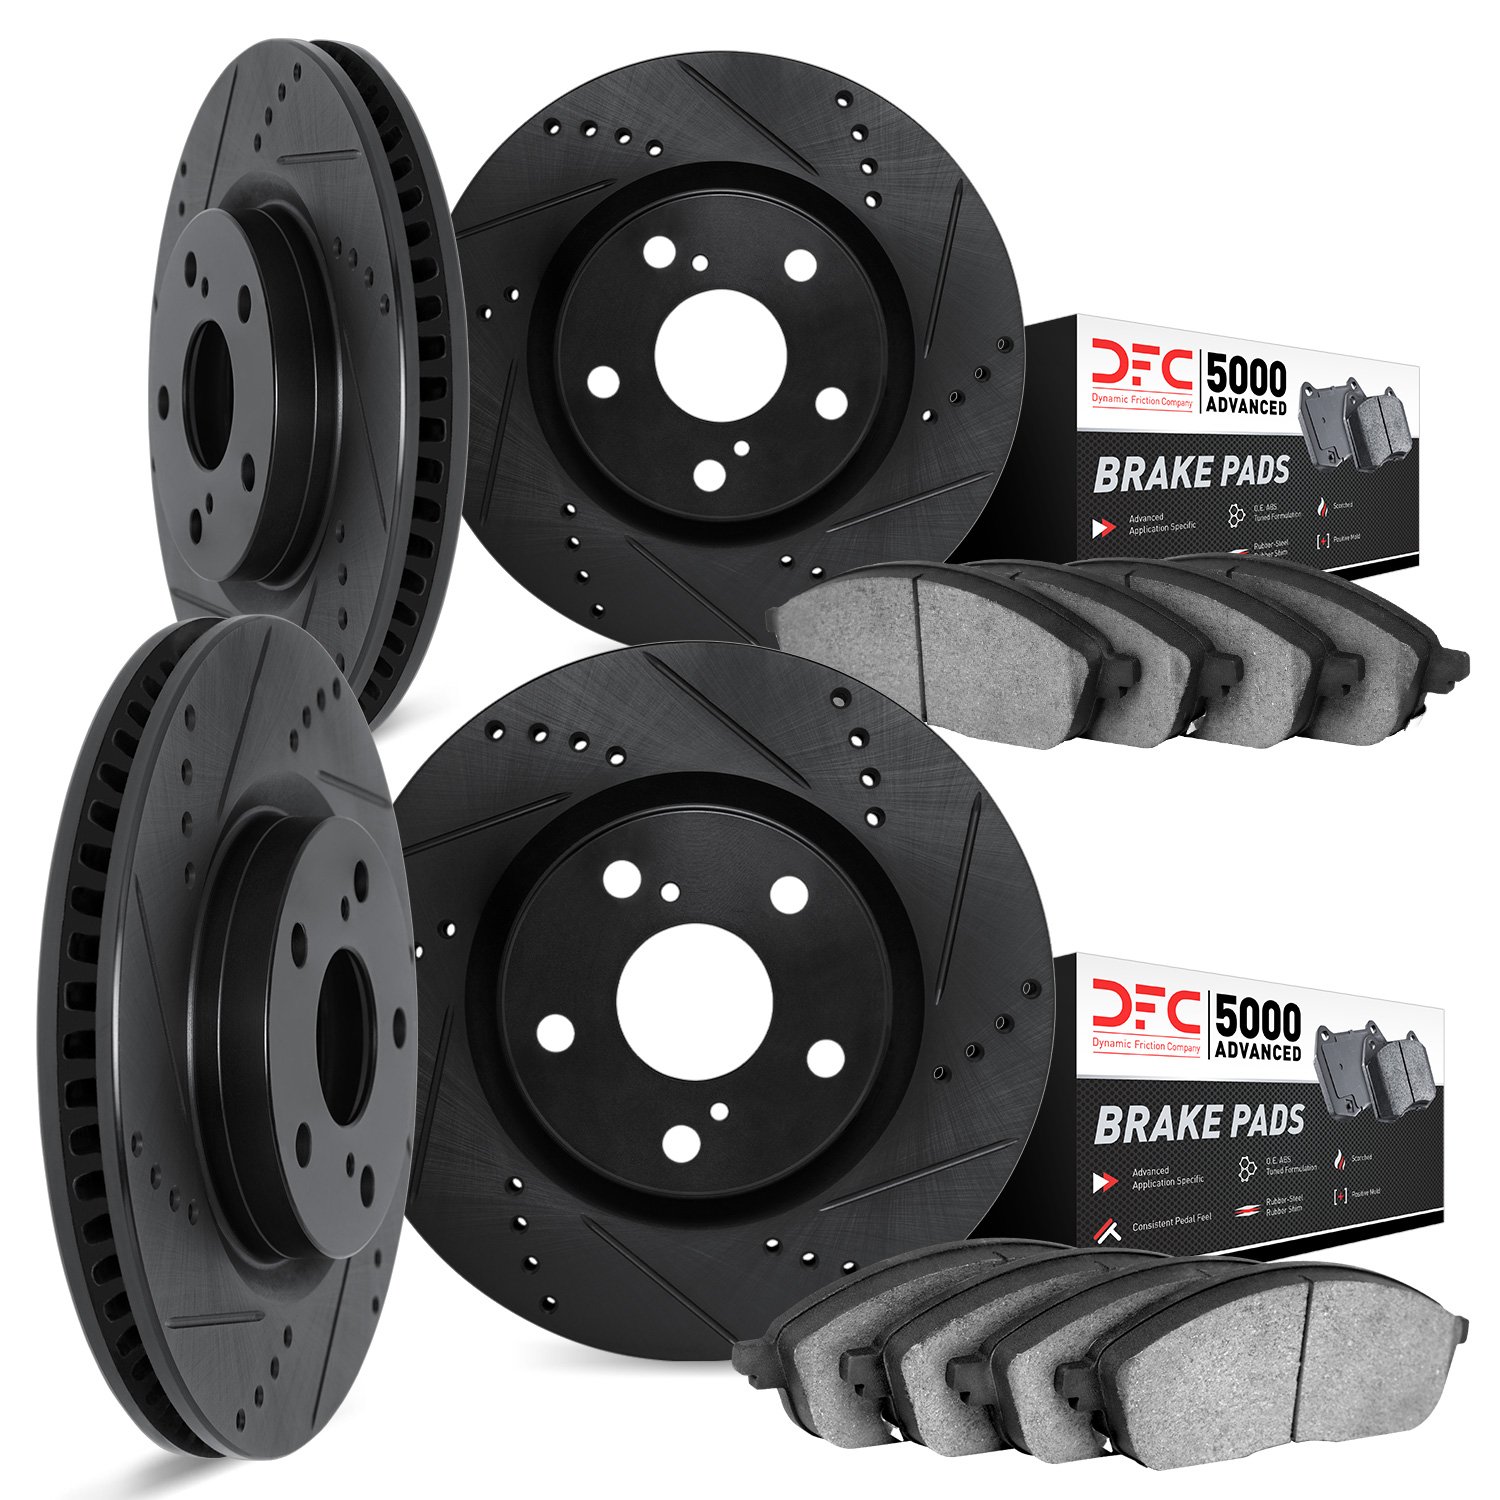 8504-31068 Drilled/Slotted Brake Rotors w/5000 Advanced Brake Pads Kit [Black], 2007-2014 BMW, Position: Front and Rear